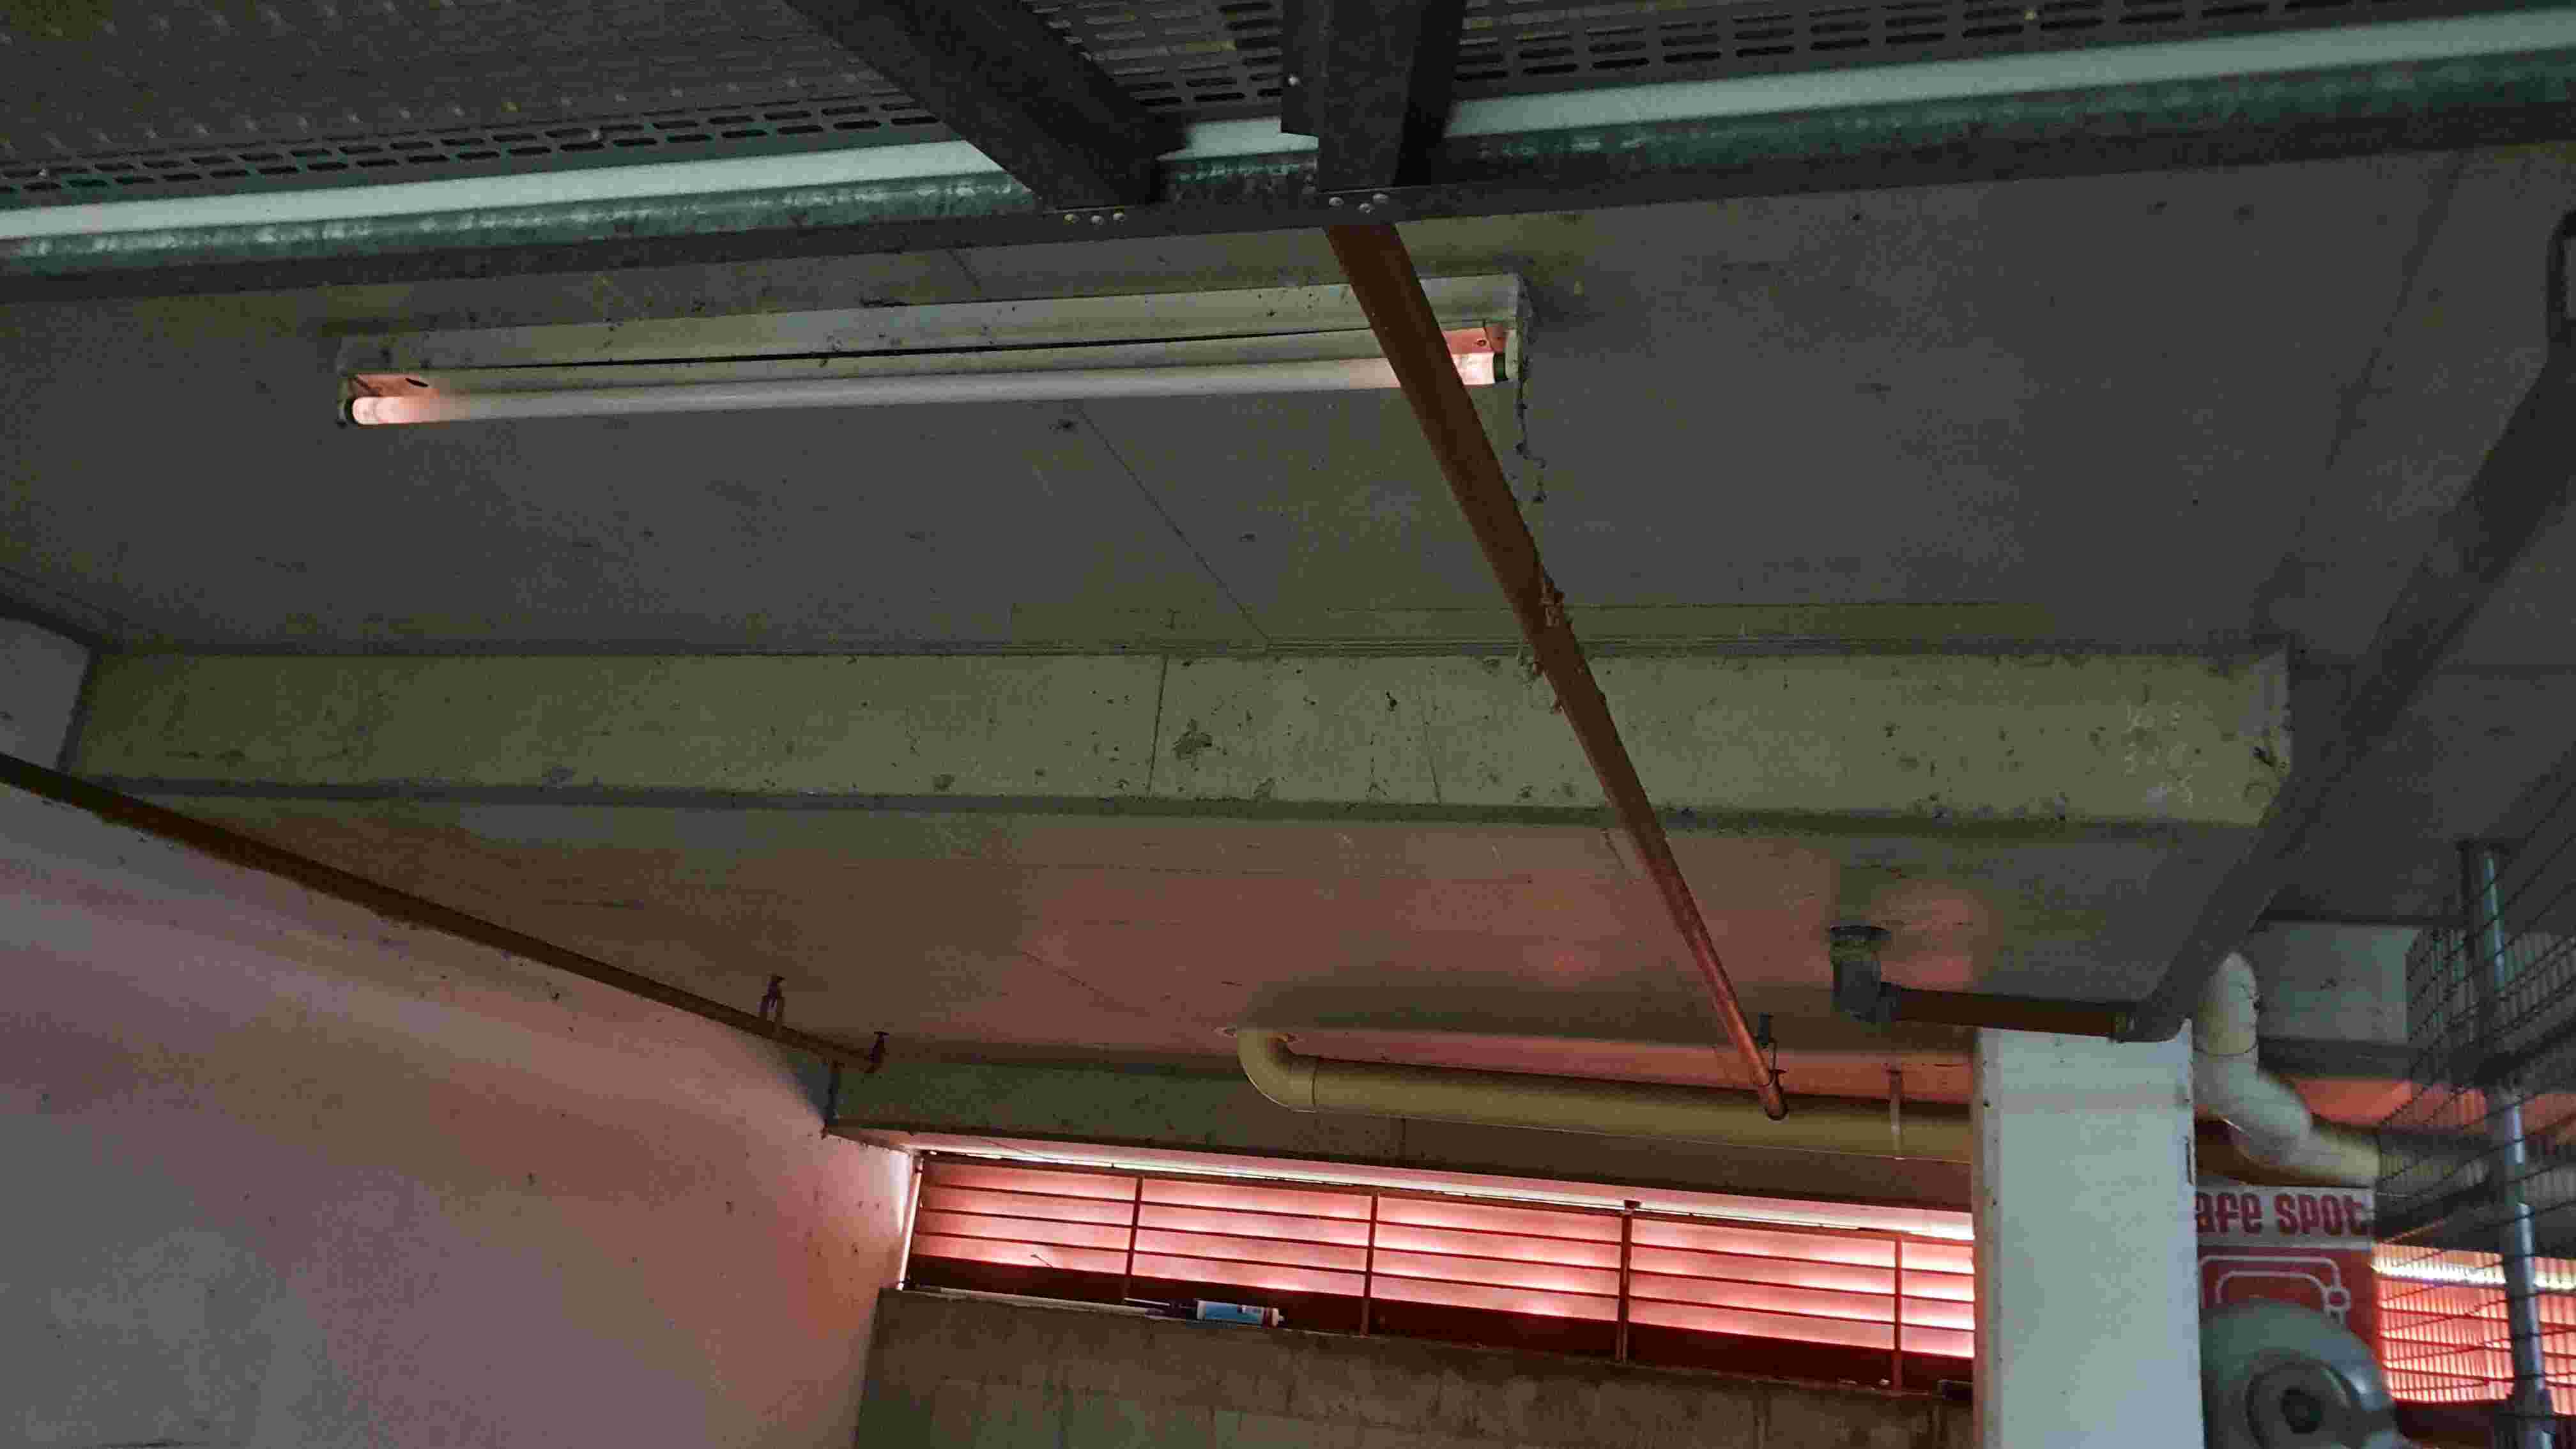 SP52948-Lot-132-garage-faulty-lights-for-two-days-photo-1-13Feb2022.jpg